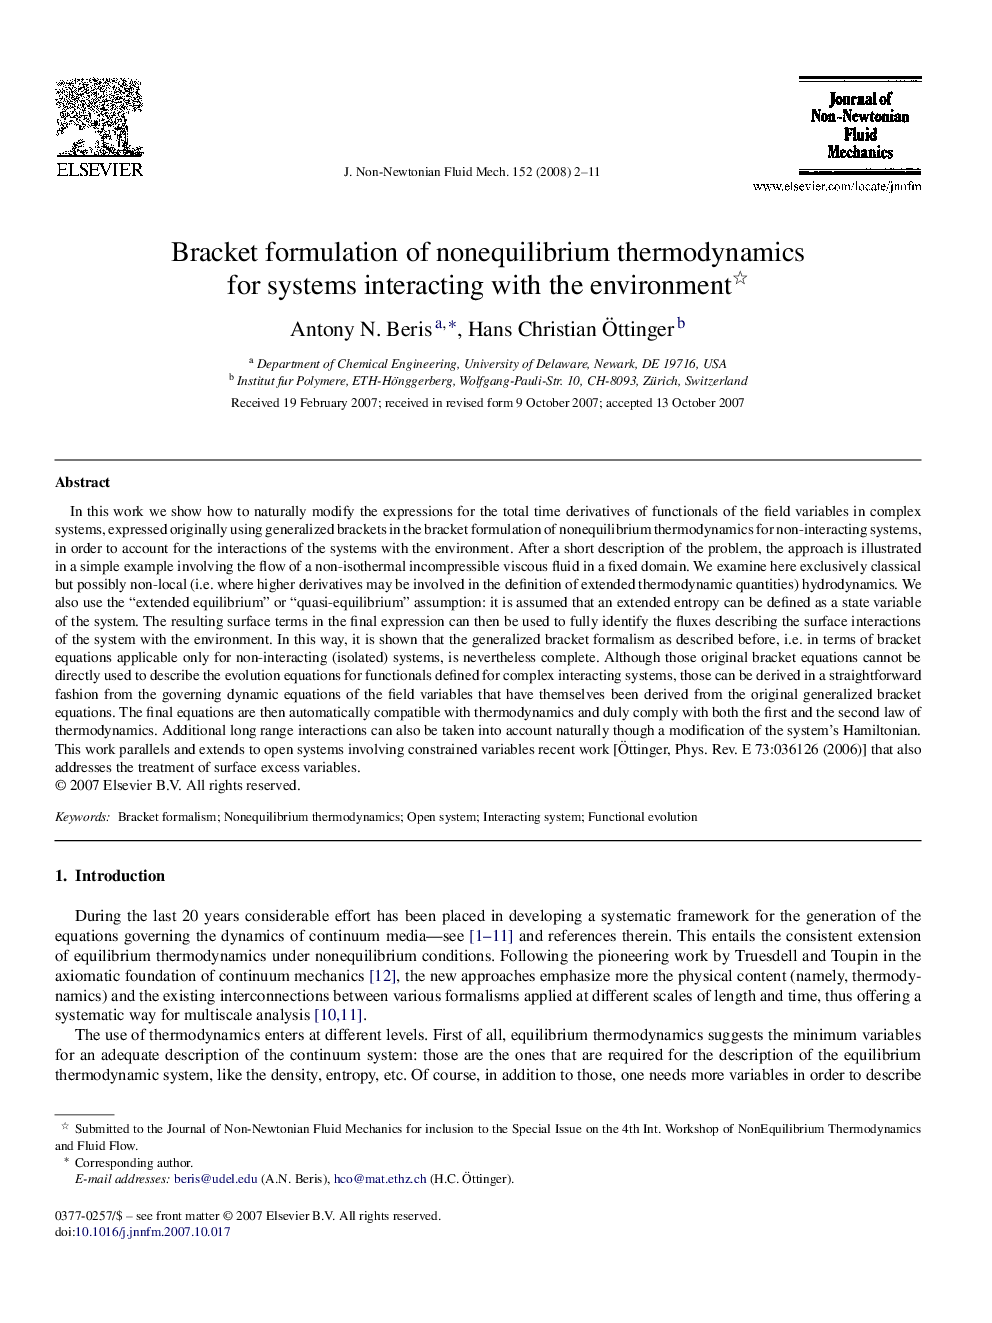 Bracket formulation of nonequilibrium thermodynamics for systems interacting with the environment 